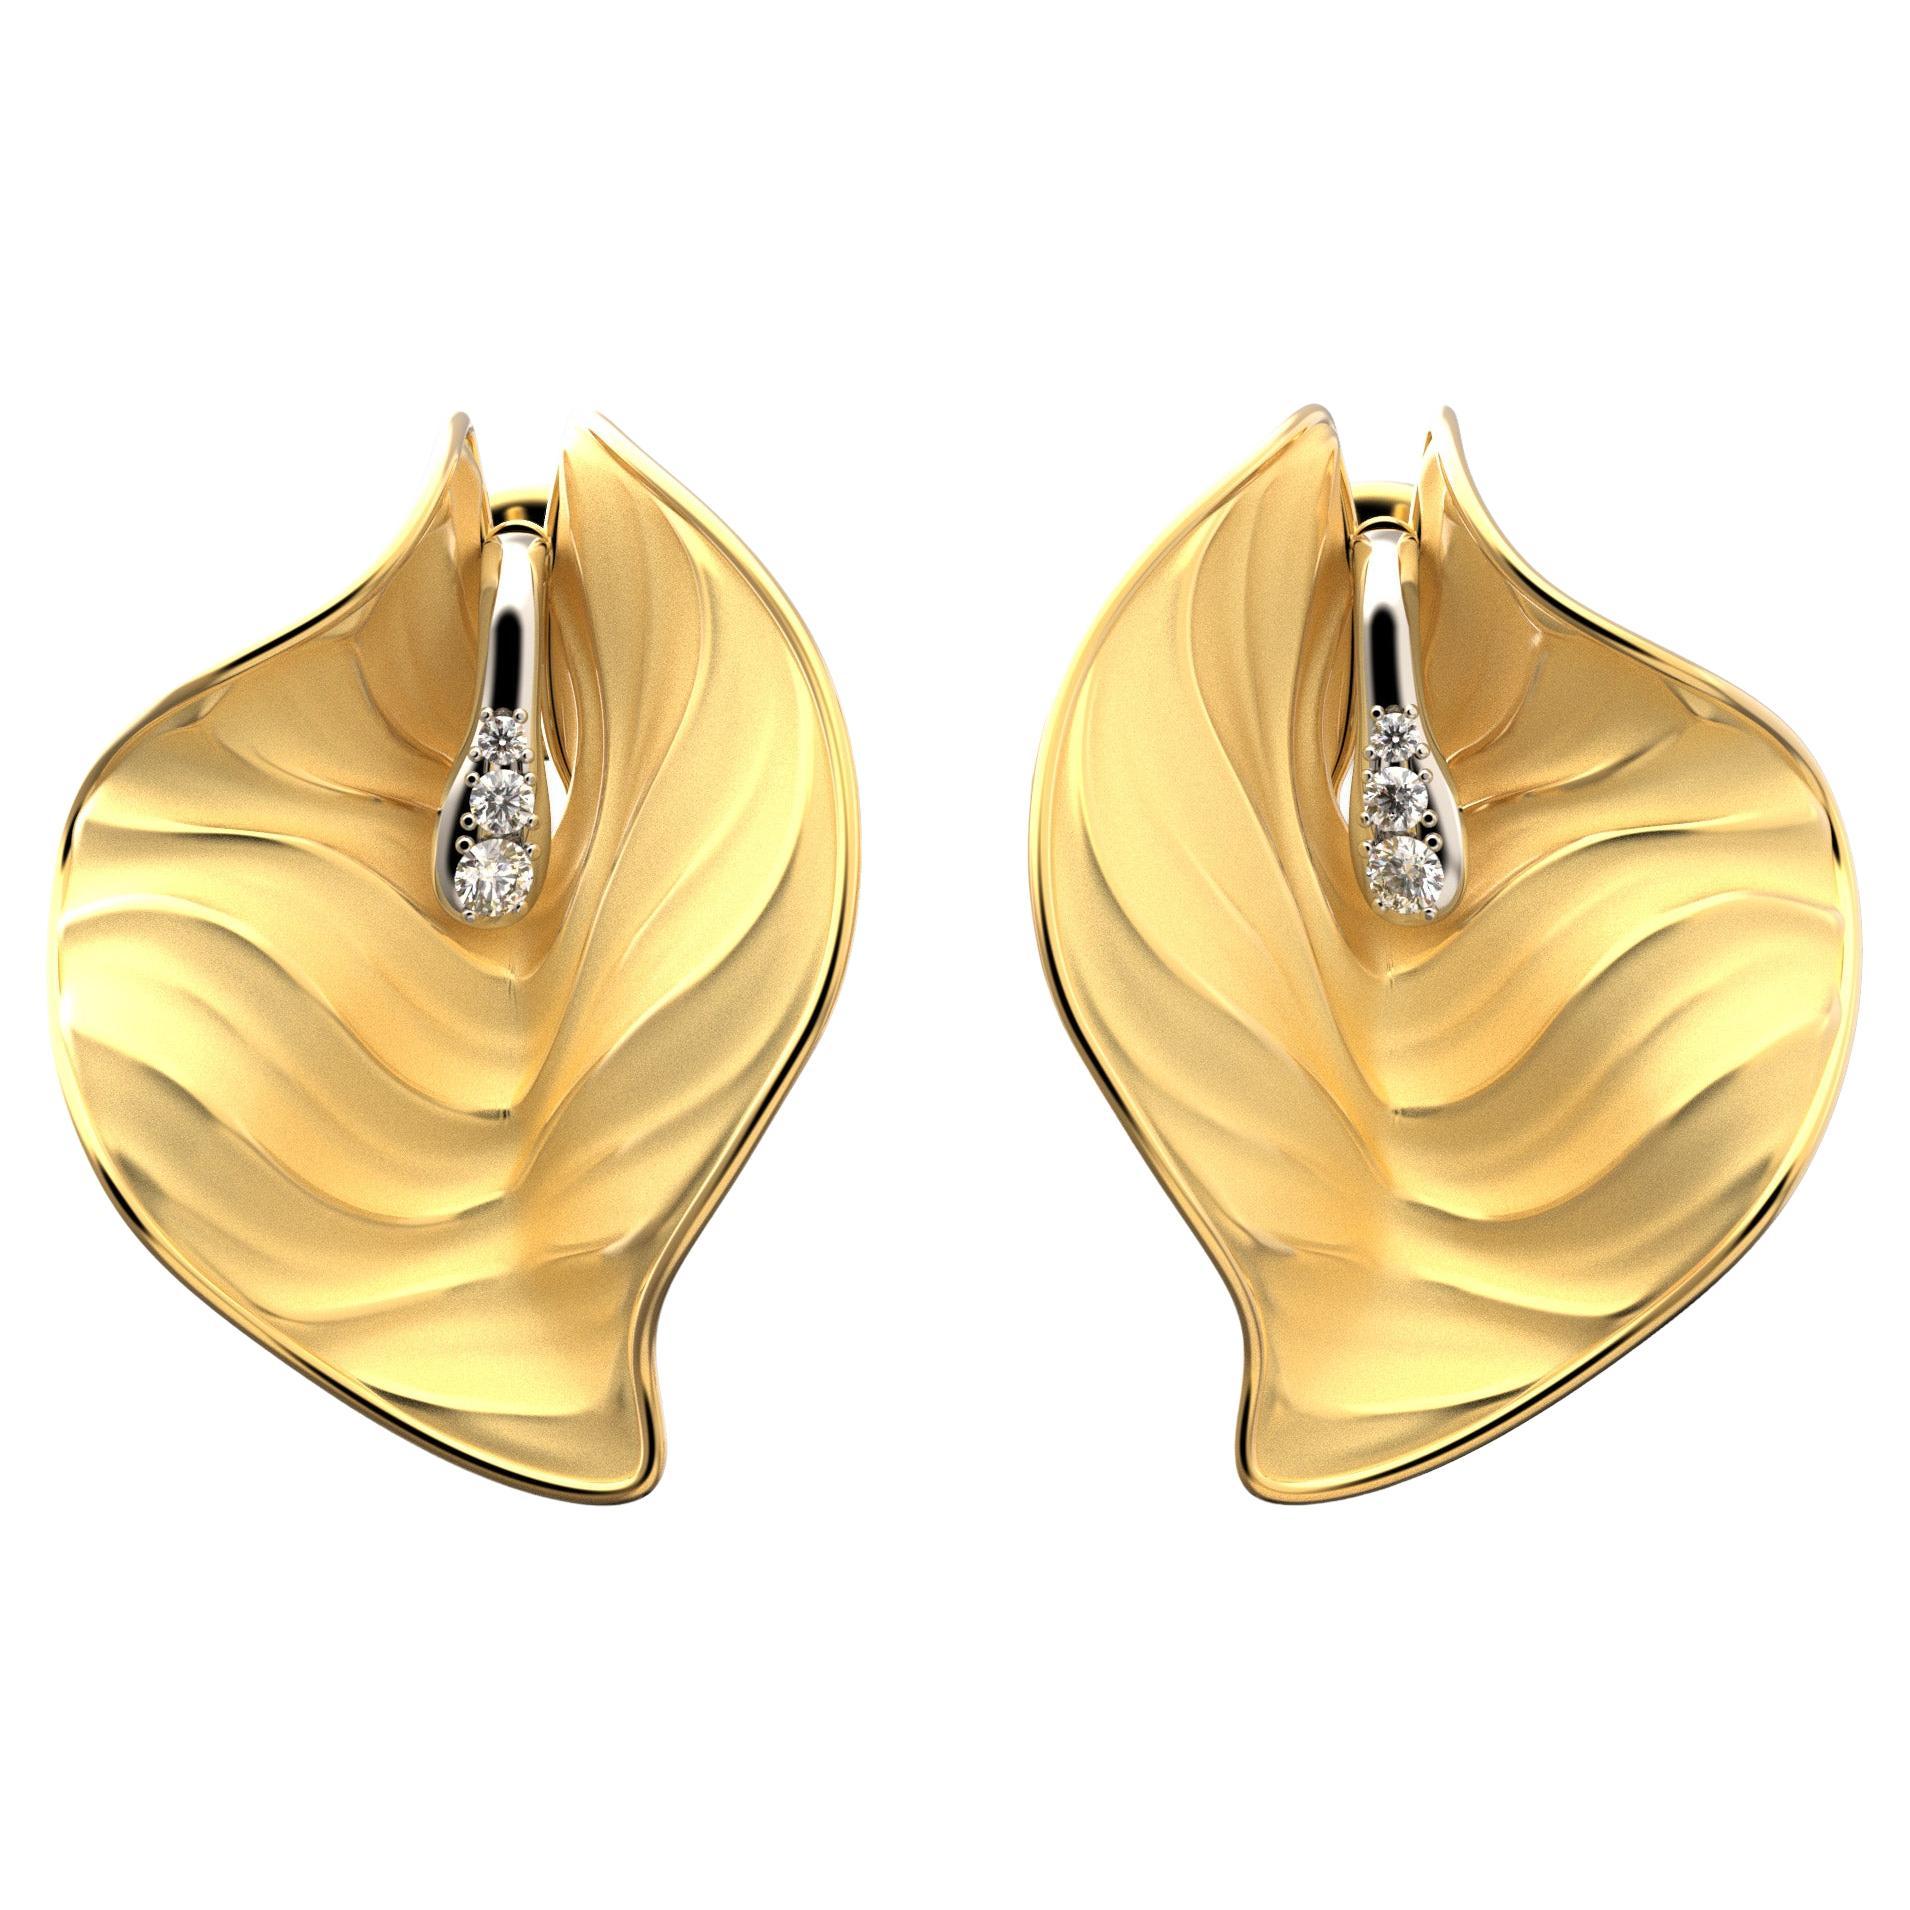 Oltremare Gioielli Gold Earrings Made in Italy, 14k Gold Earrings with Diamonds